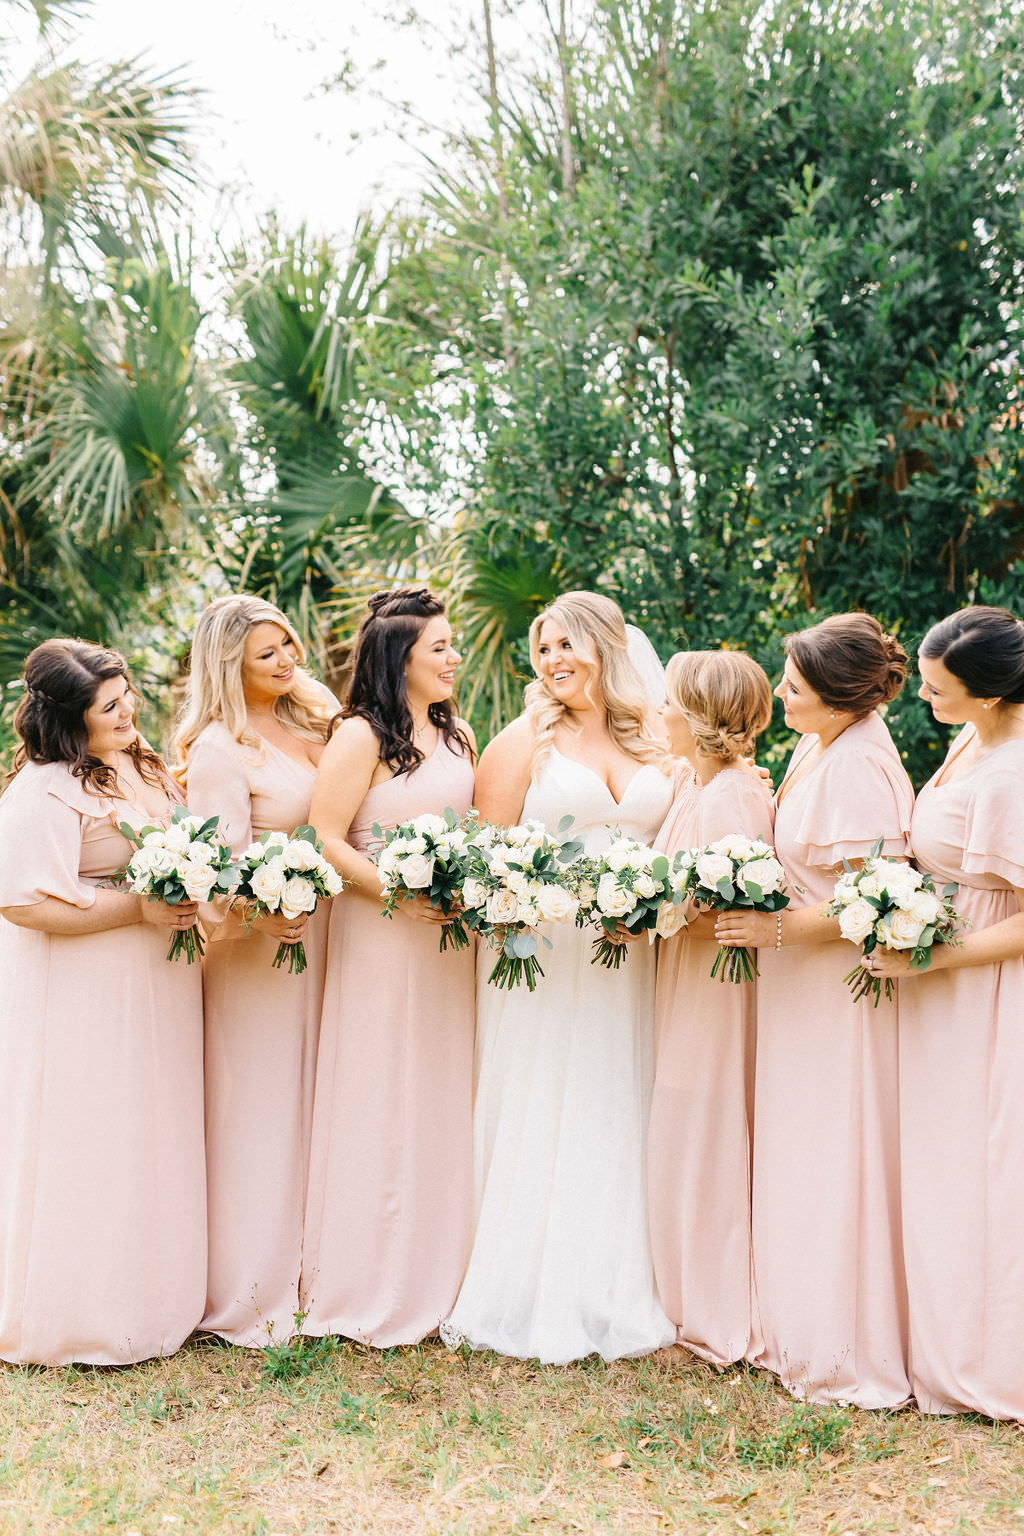 Tampa Bay Brides and Bridesmaids, Florida Bridal Party in Long Floor Length Mix and Match Blush Pink Dresses from Show Me Your Mumu, Holding Elegant White and Ivory Floral Bouquets |Tampa Bay Wedding Planner UNIQUE Weddings and Events